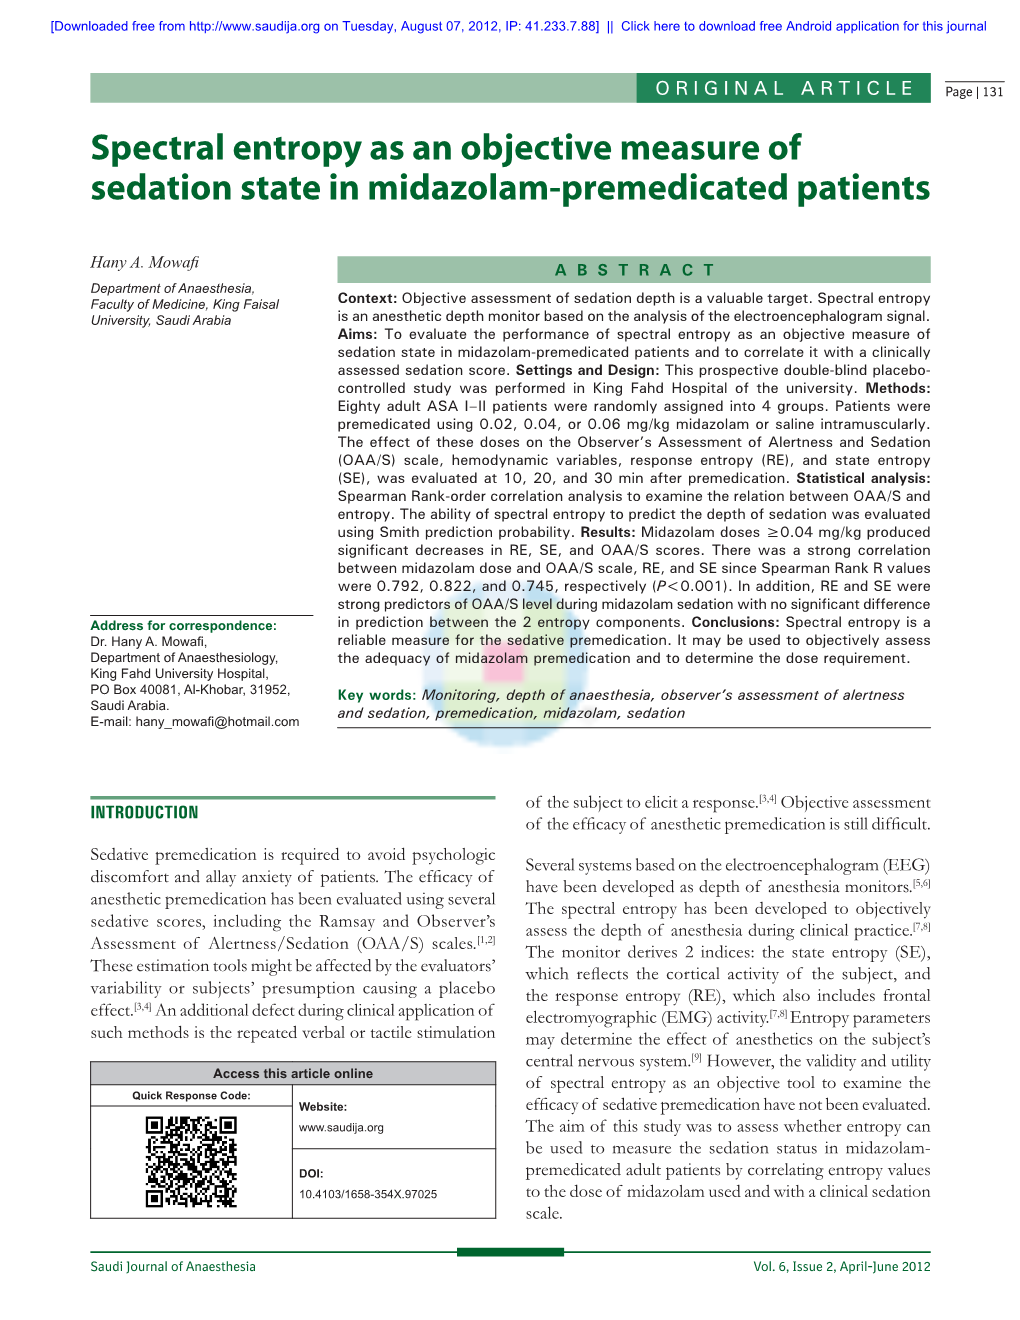 Spectral Entropy As an Objective Measure of Sedation State in Midazolam-Premedicated Patients